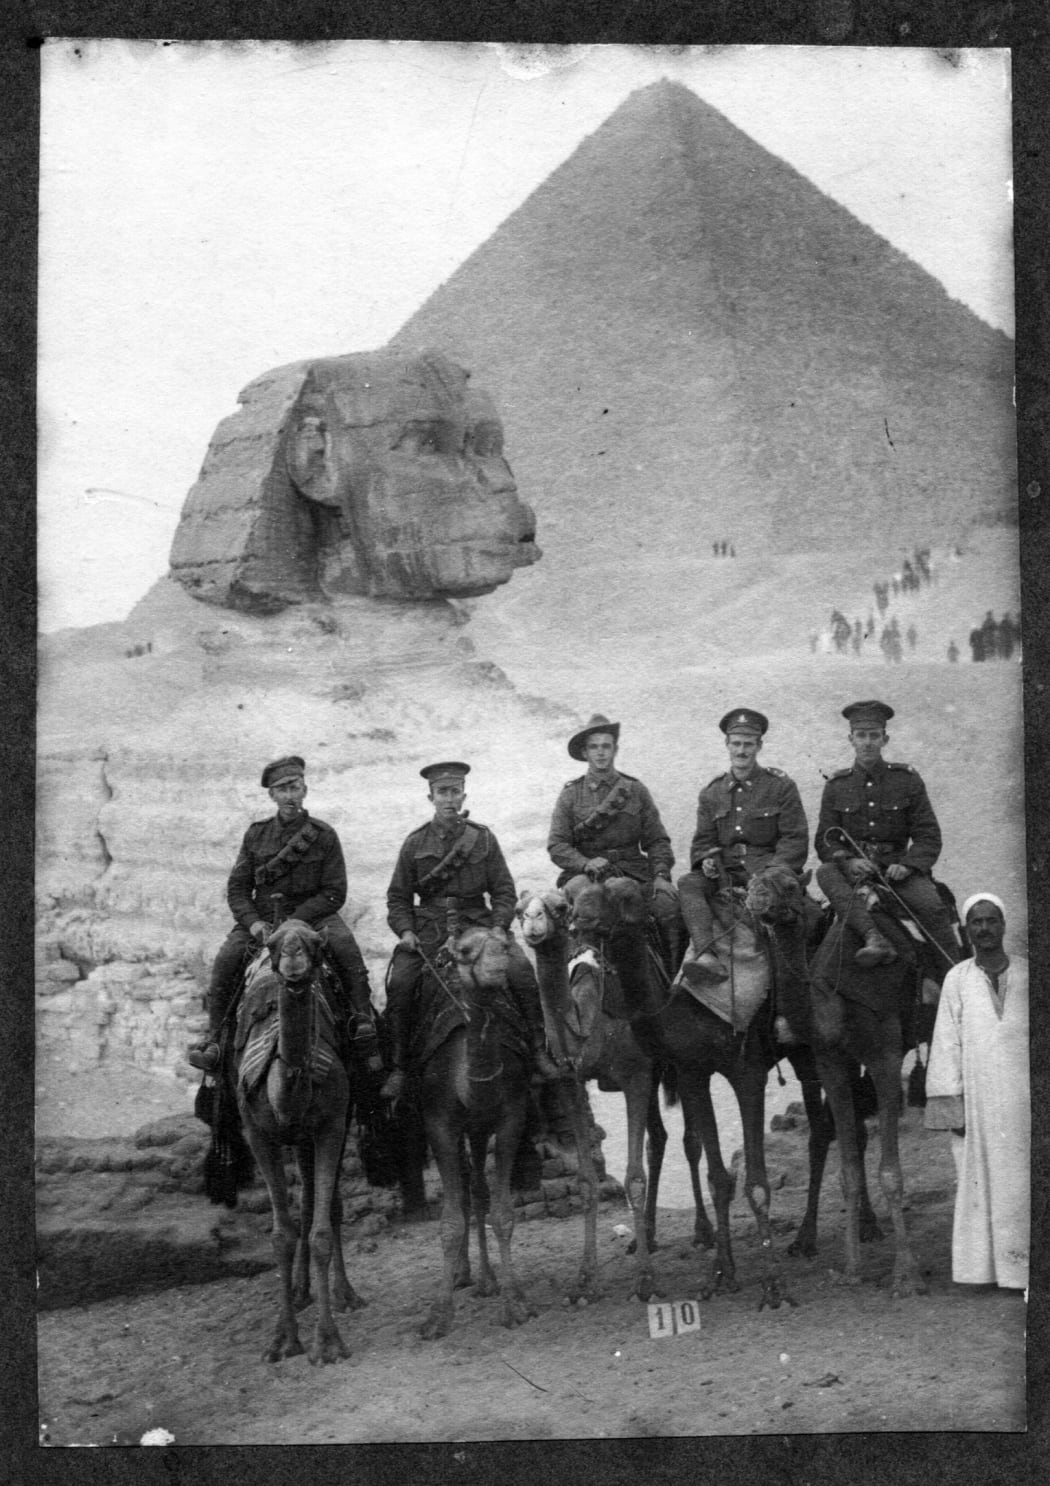 The obligatory camel and pyramid shot for Anzac soldiers in Egypt